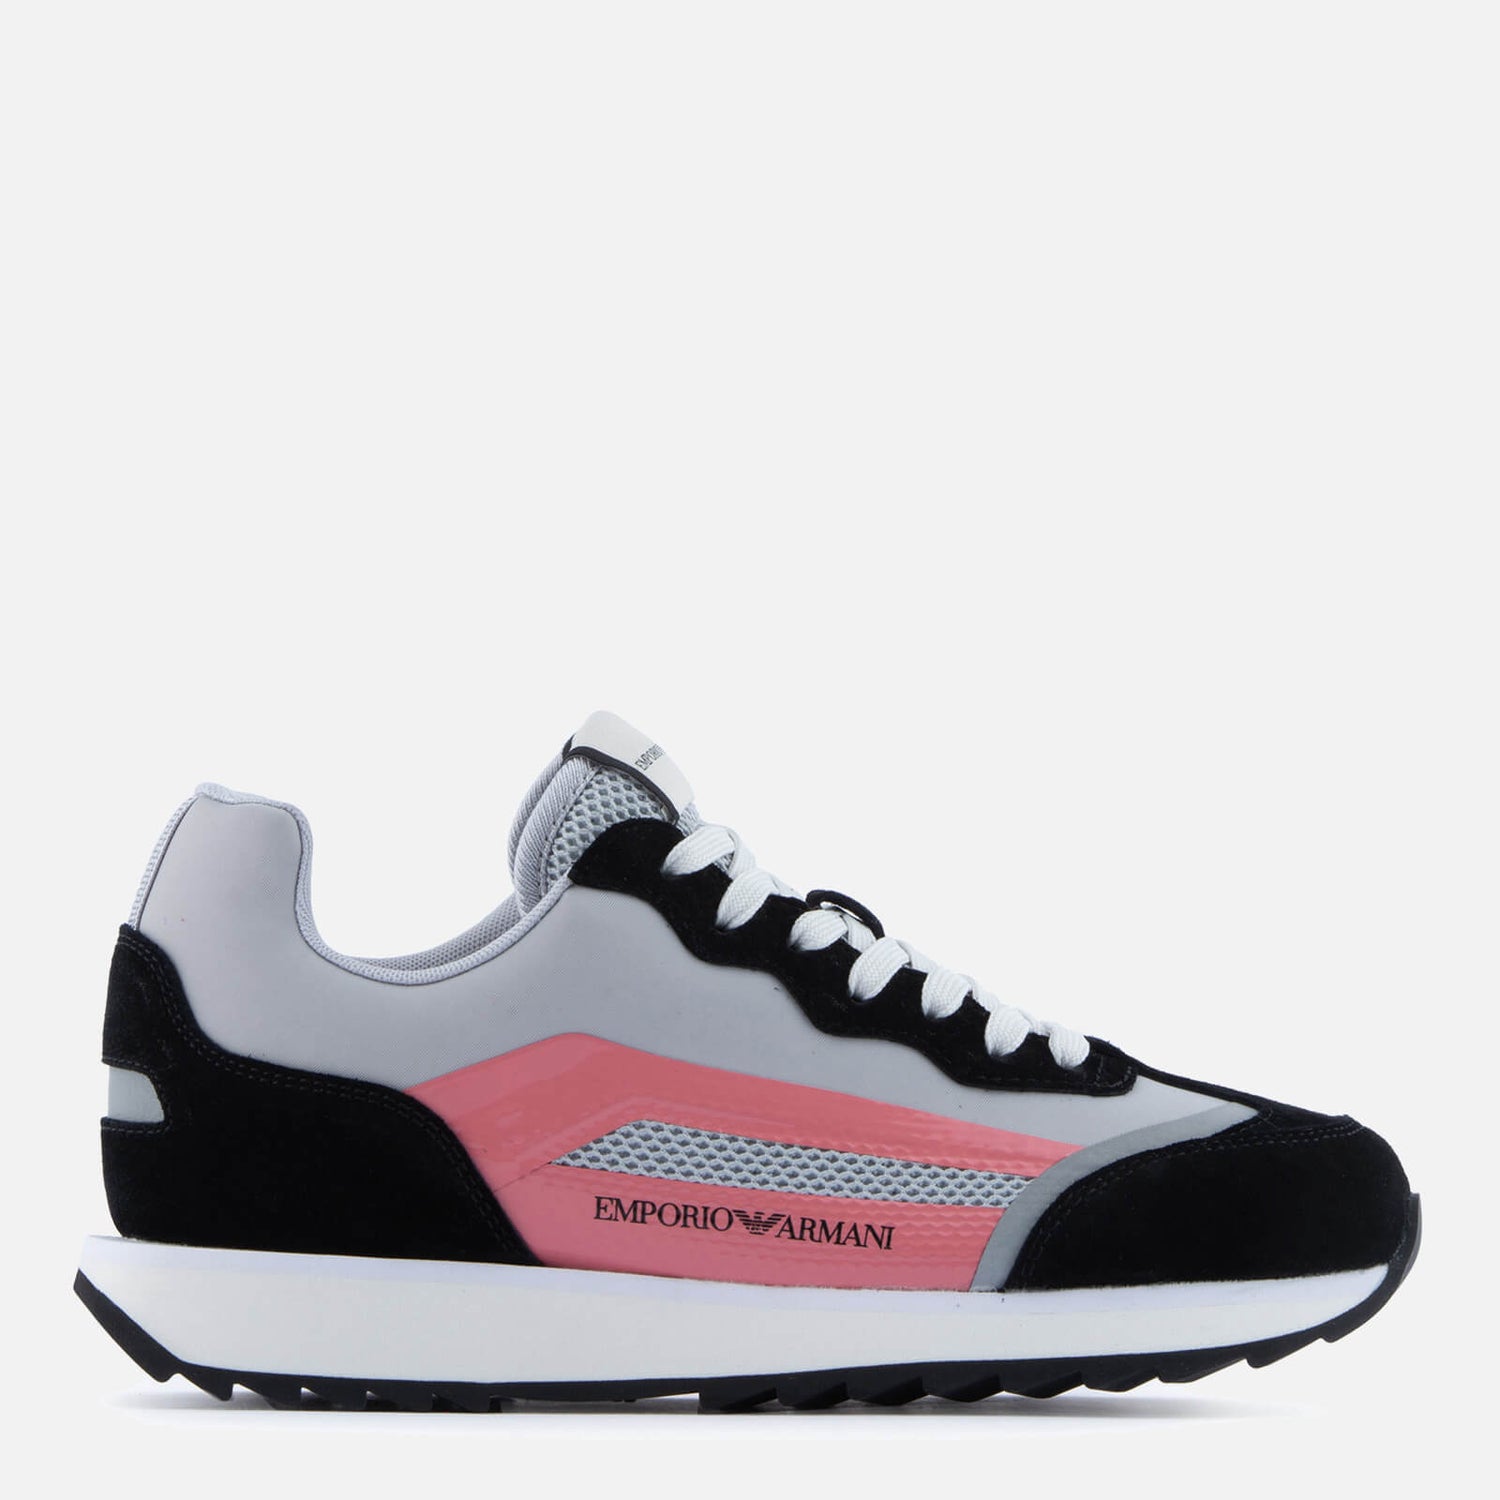 Emporio Armani Women's Abby B Suede Running Style Trainers - Black/Pearl - UK 3